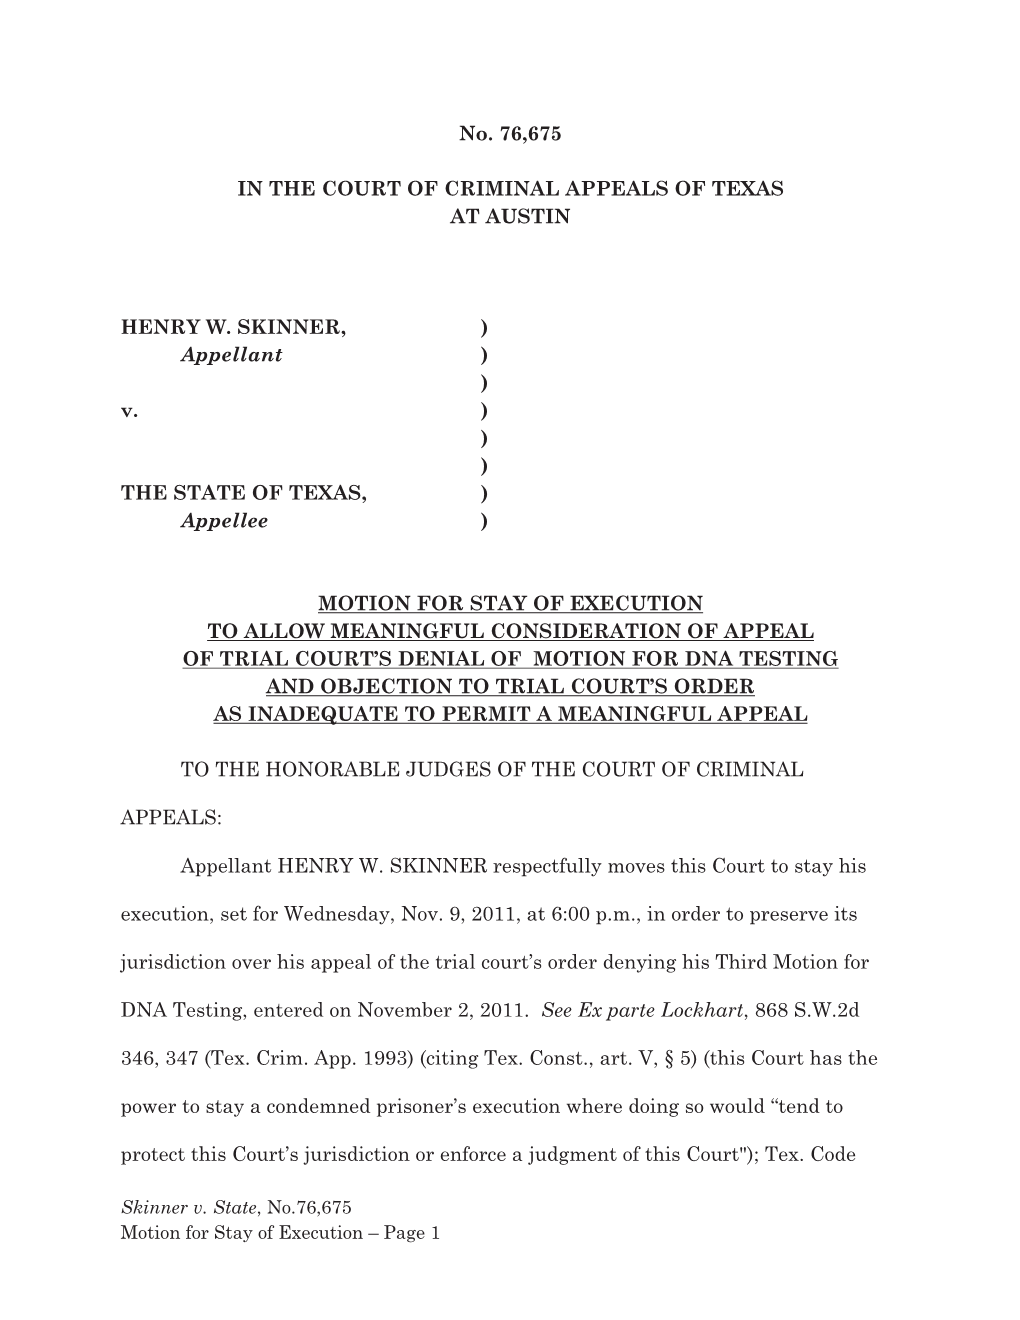 No. 76,675 in the COURT of CRIMINAL APPEALS of TEXAS AT